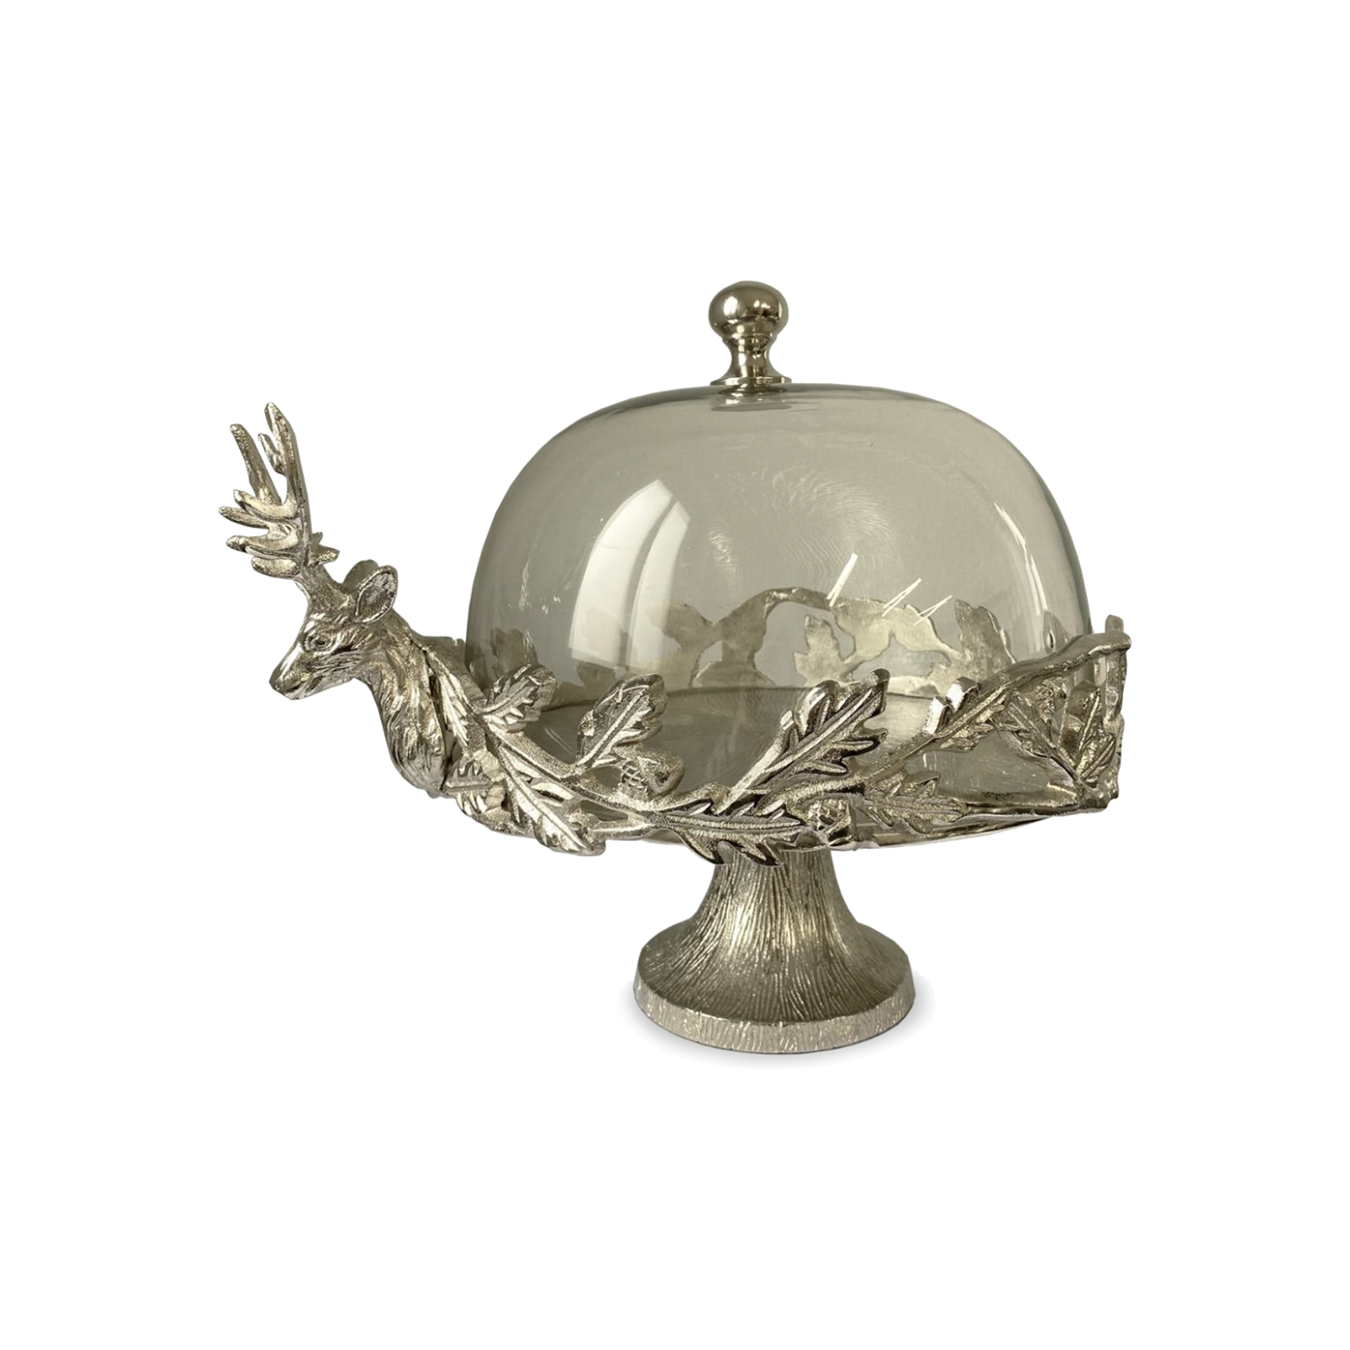 Stag Cake Stand with Glass Dome